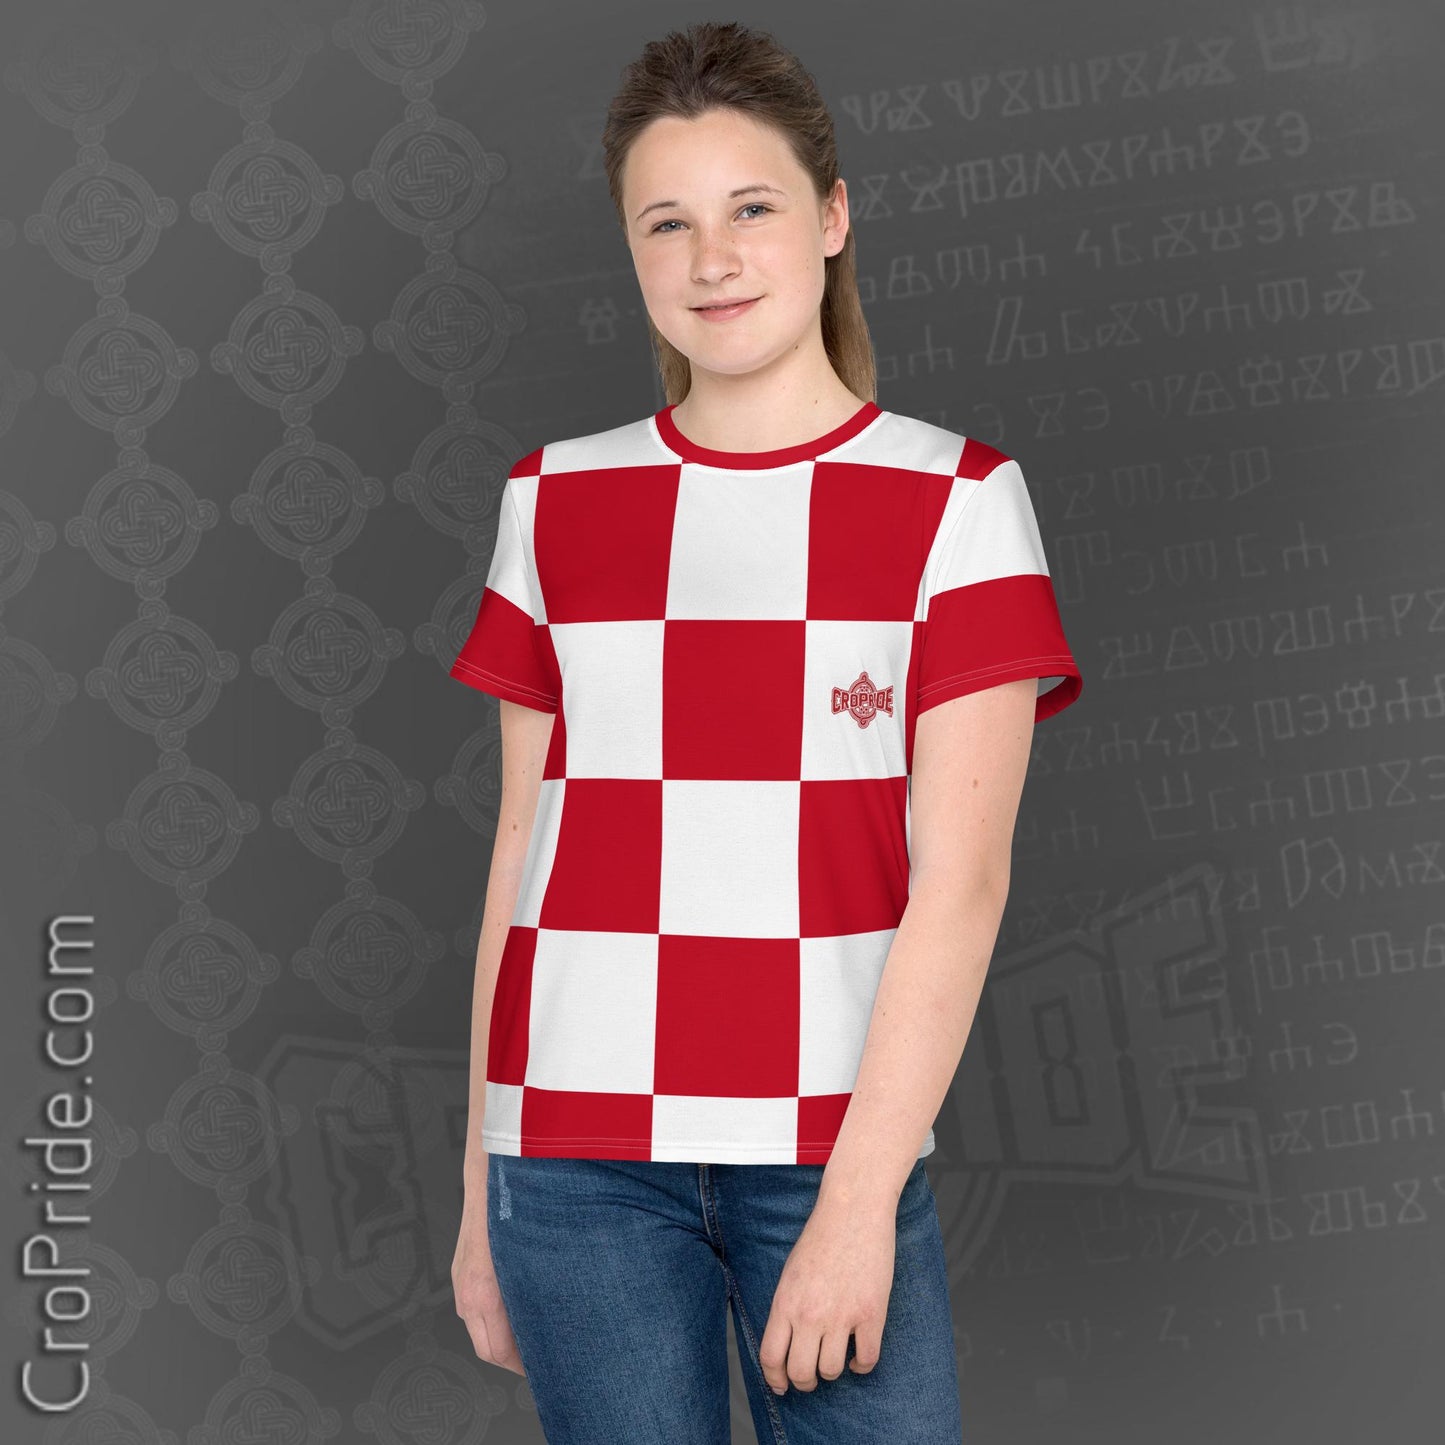 Croatian Checkers "Mi Hrvati" Youth Crew Neck T-Shirt - 95% Polyester | 4-Way Stretch Fabric